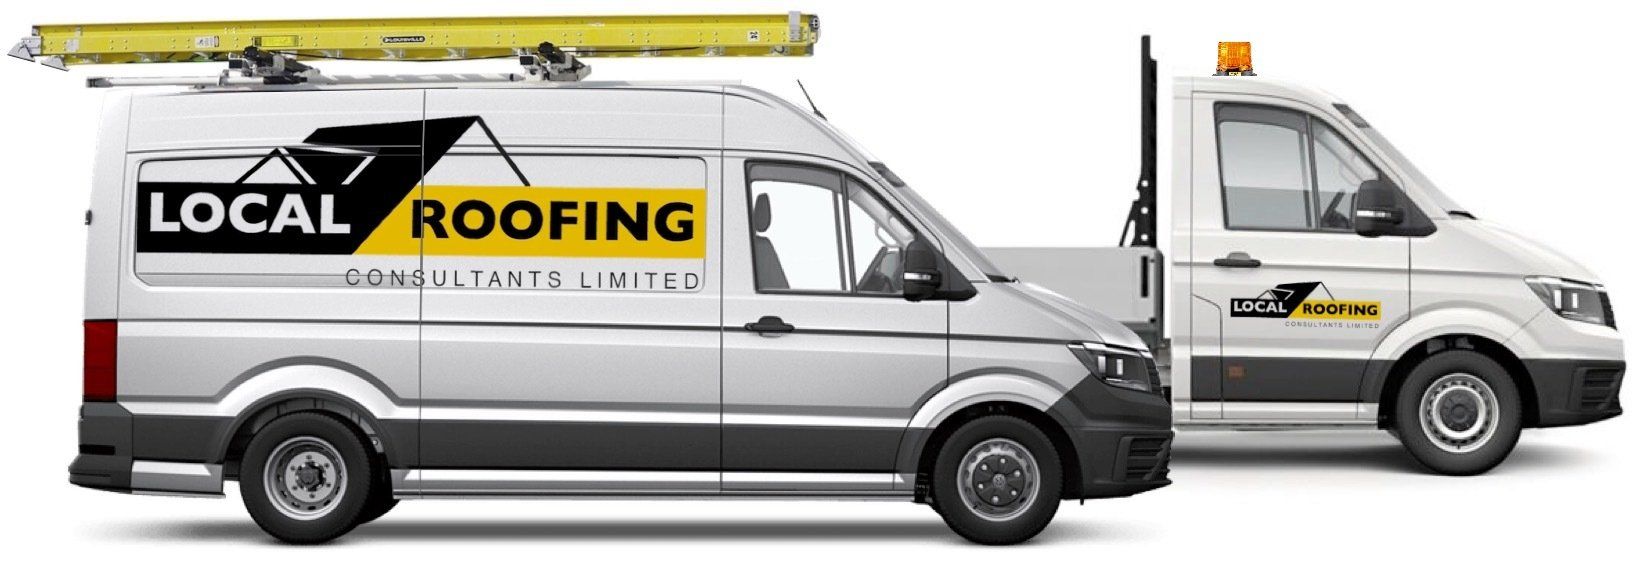 London Roofing Consultants Limited work throughout London, Berkshire and Surrey